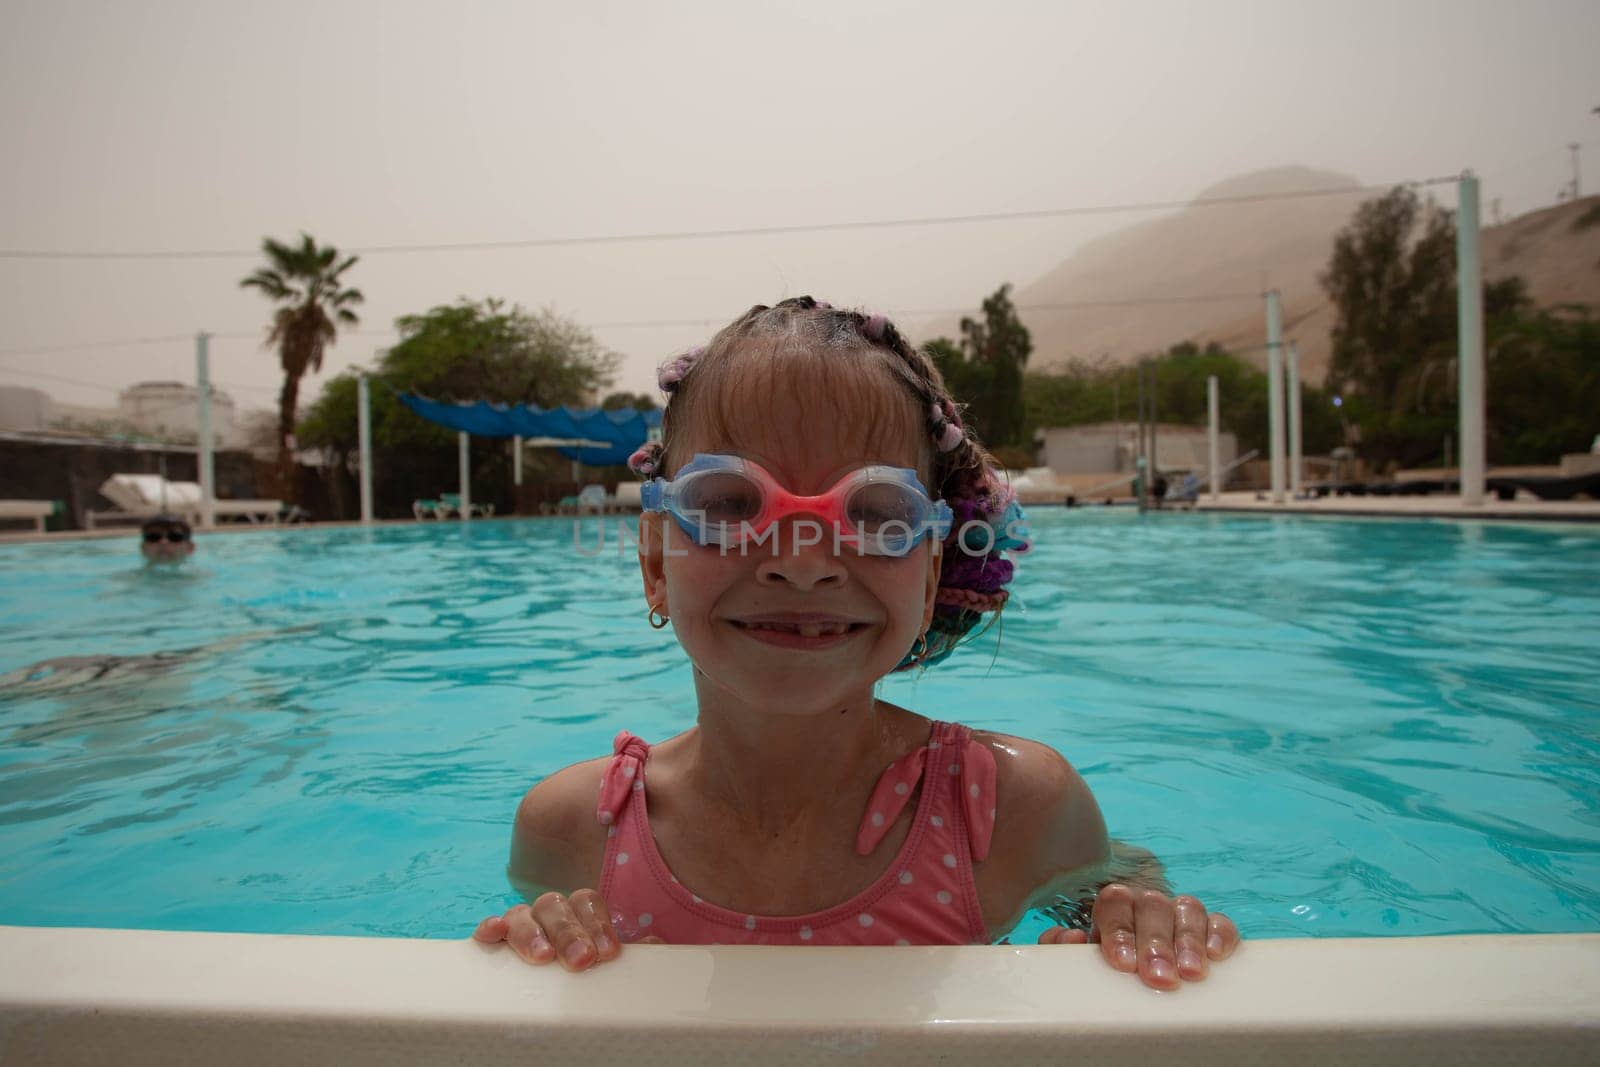 A girl with glasses and bright pigtails swims in the pool by gordiza